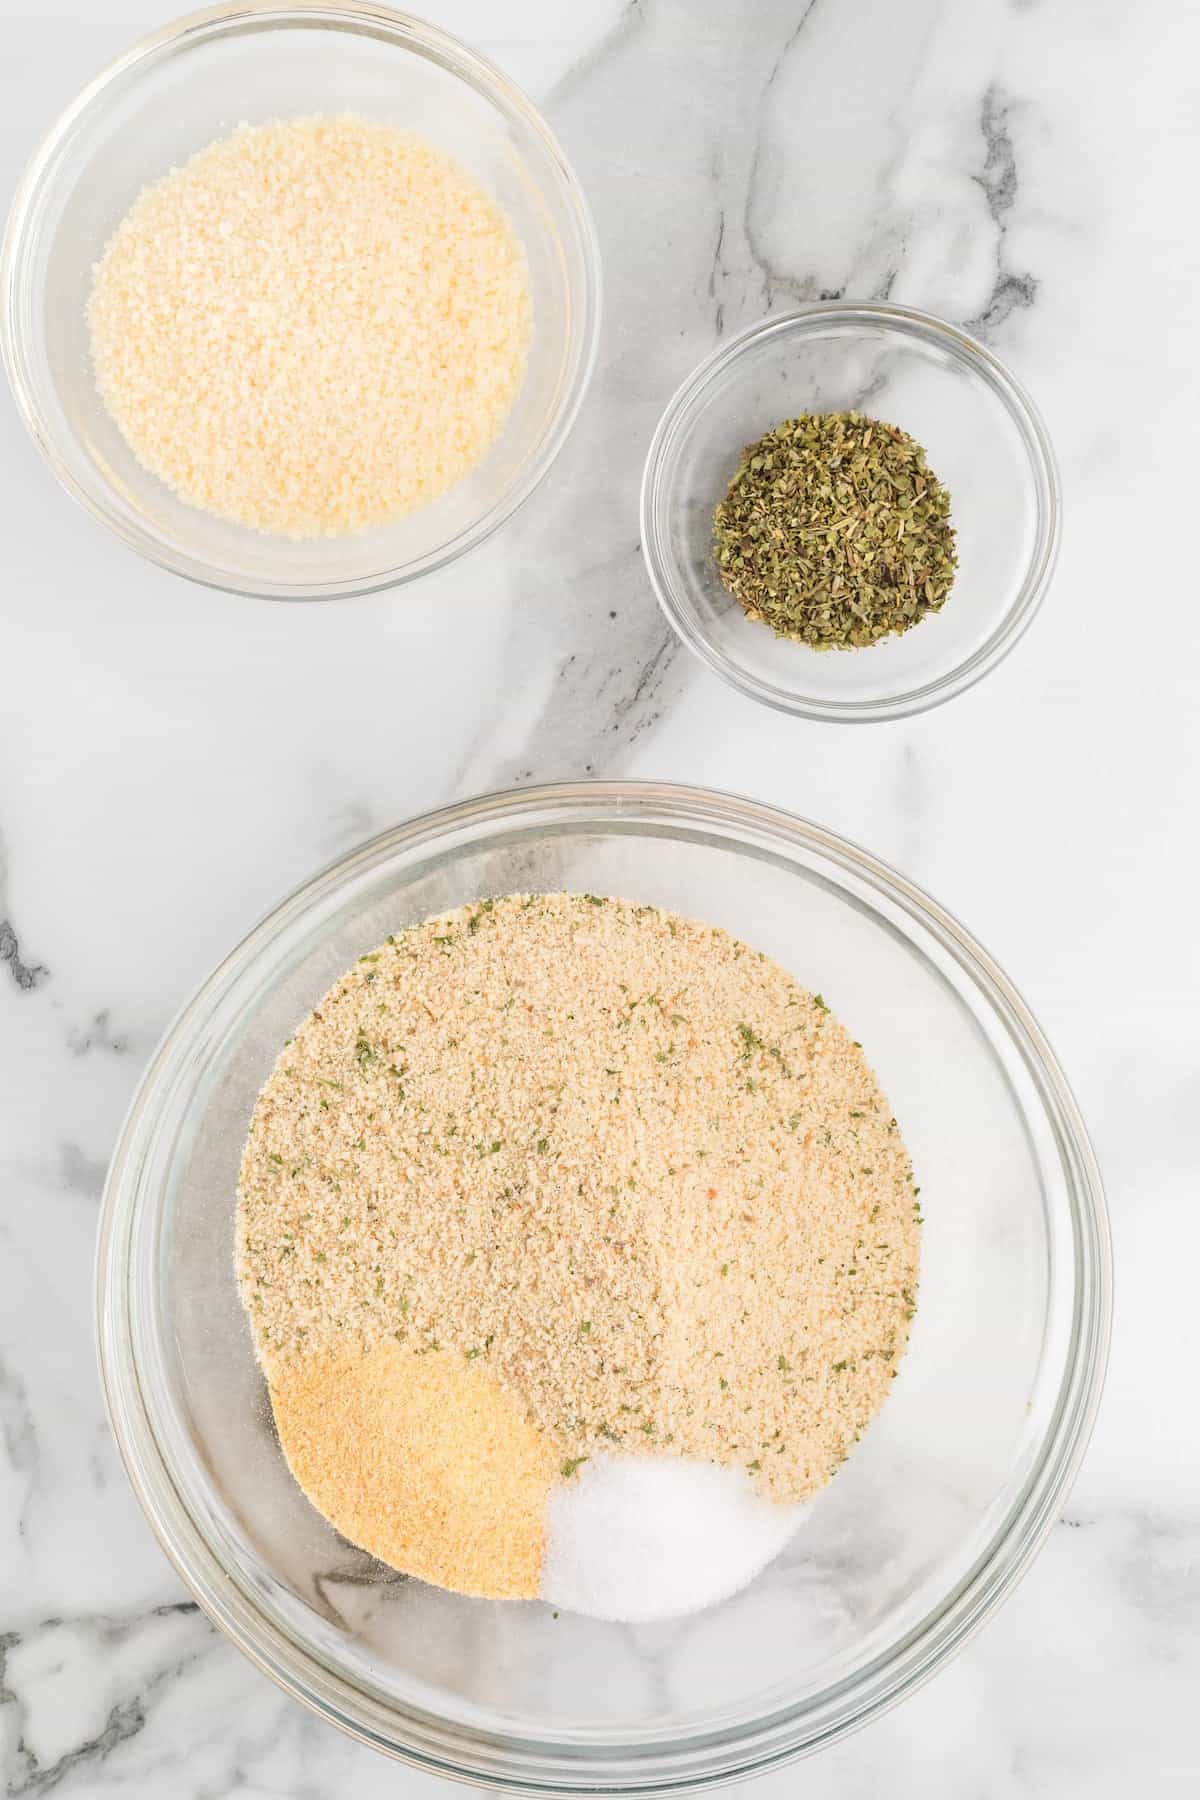 seasonings and breadcrumbs layered together in a glass bowl.